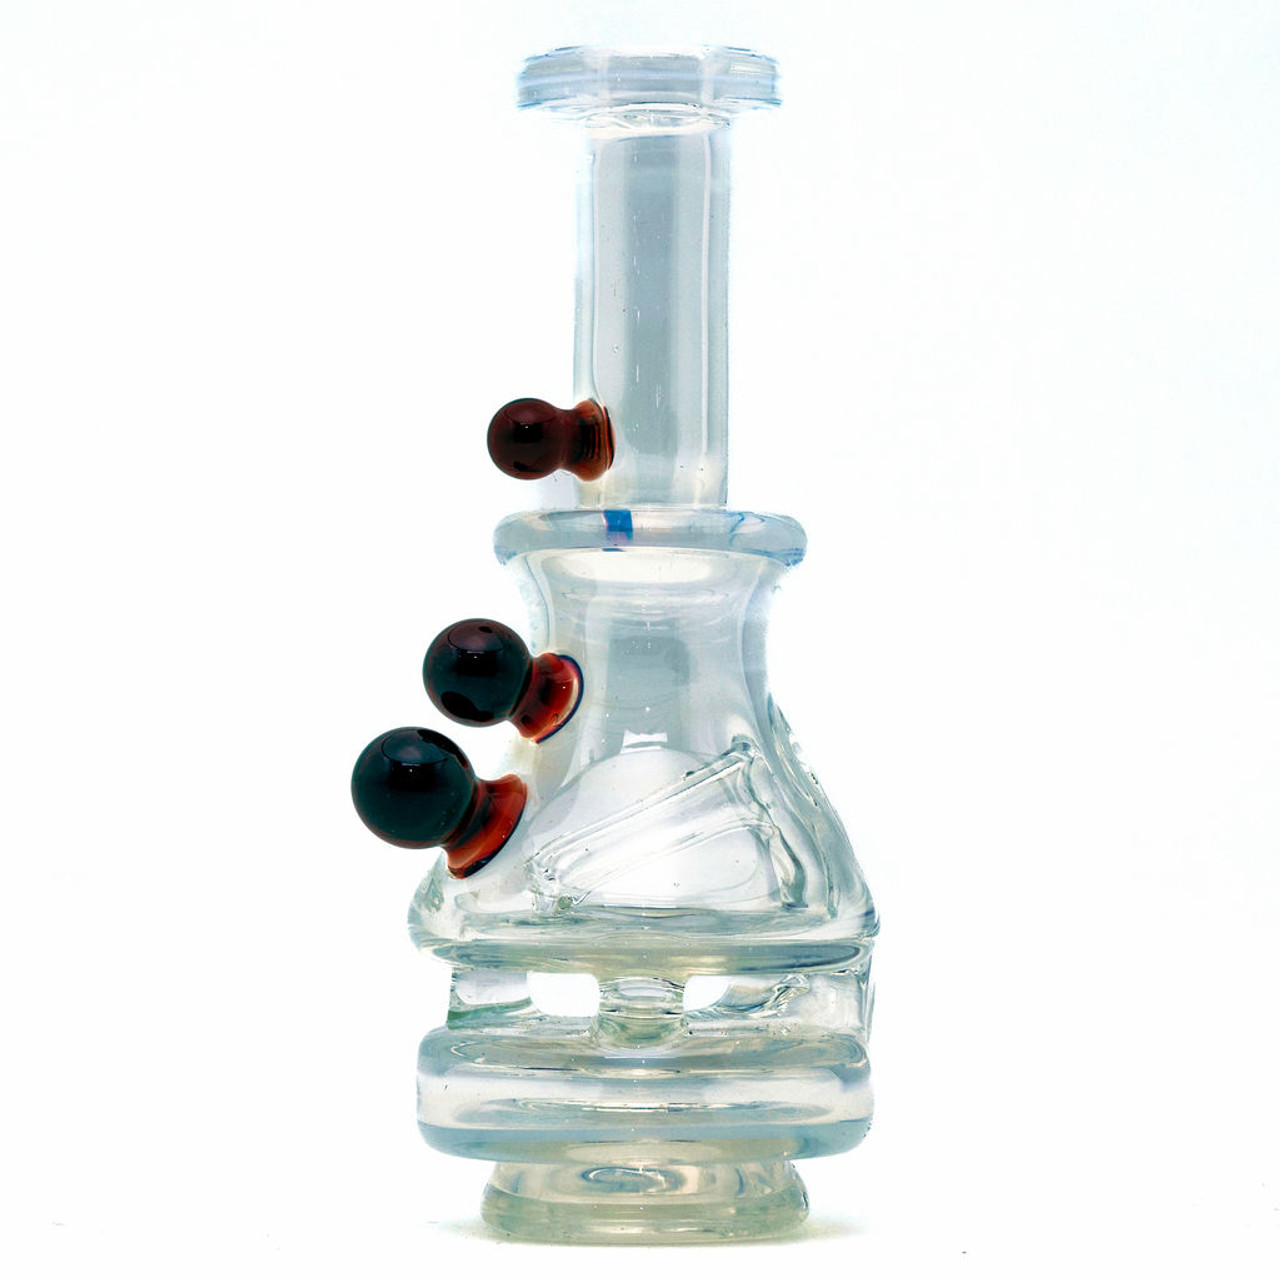 Puffco Peak Water Filter - Custom Puffco Top by Happy Time Glass #13 - Elev8